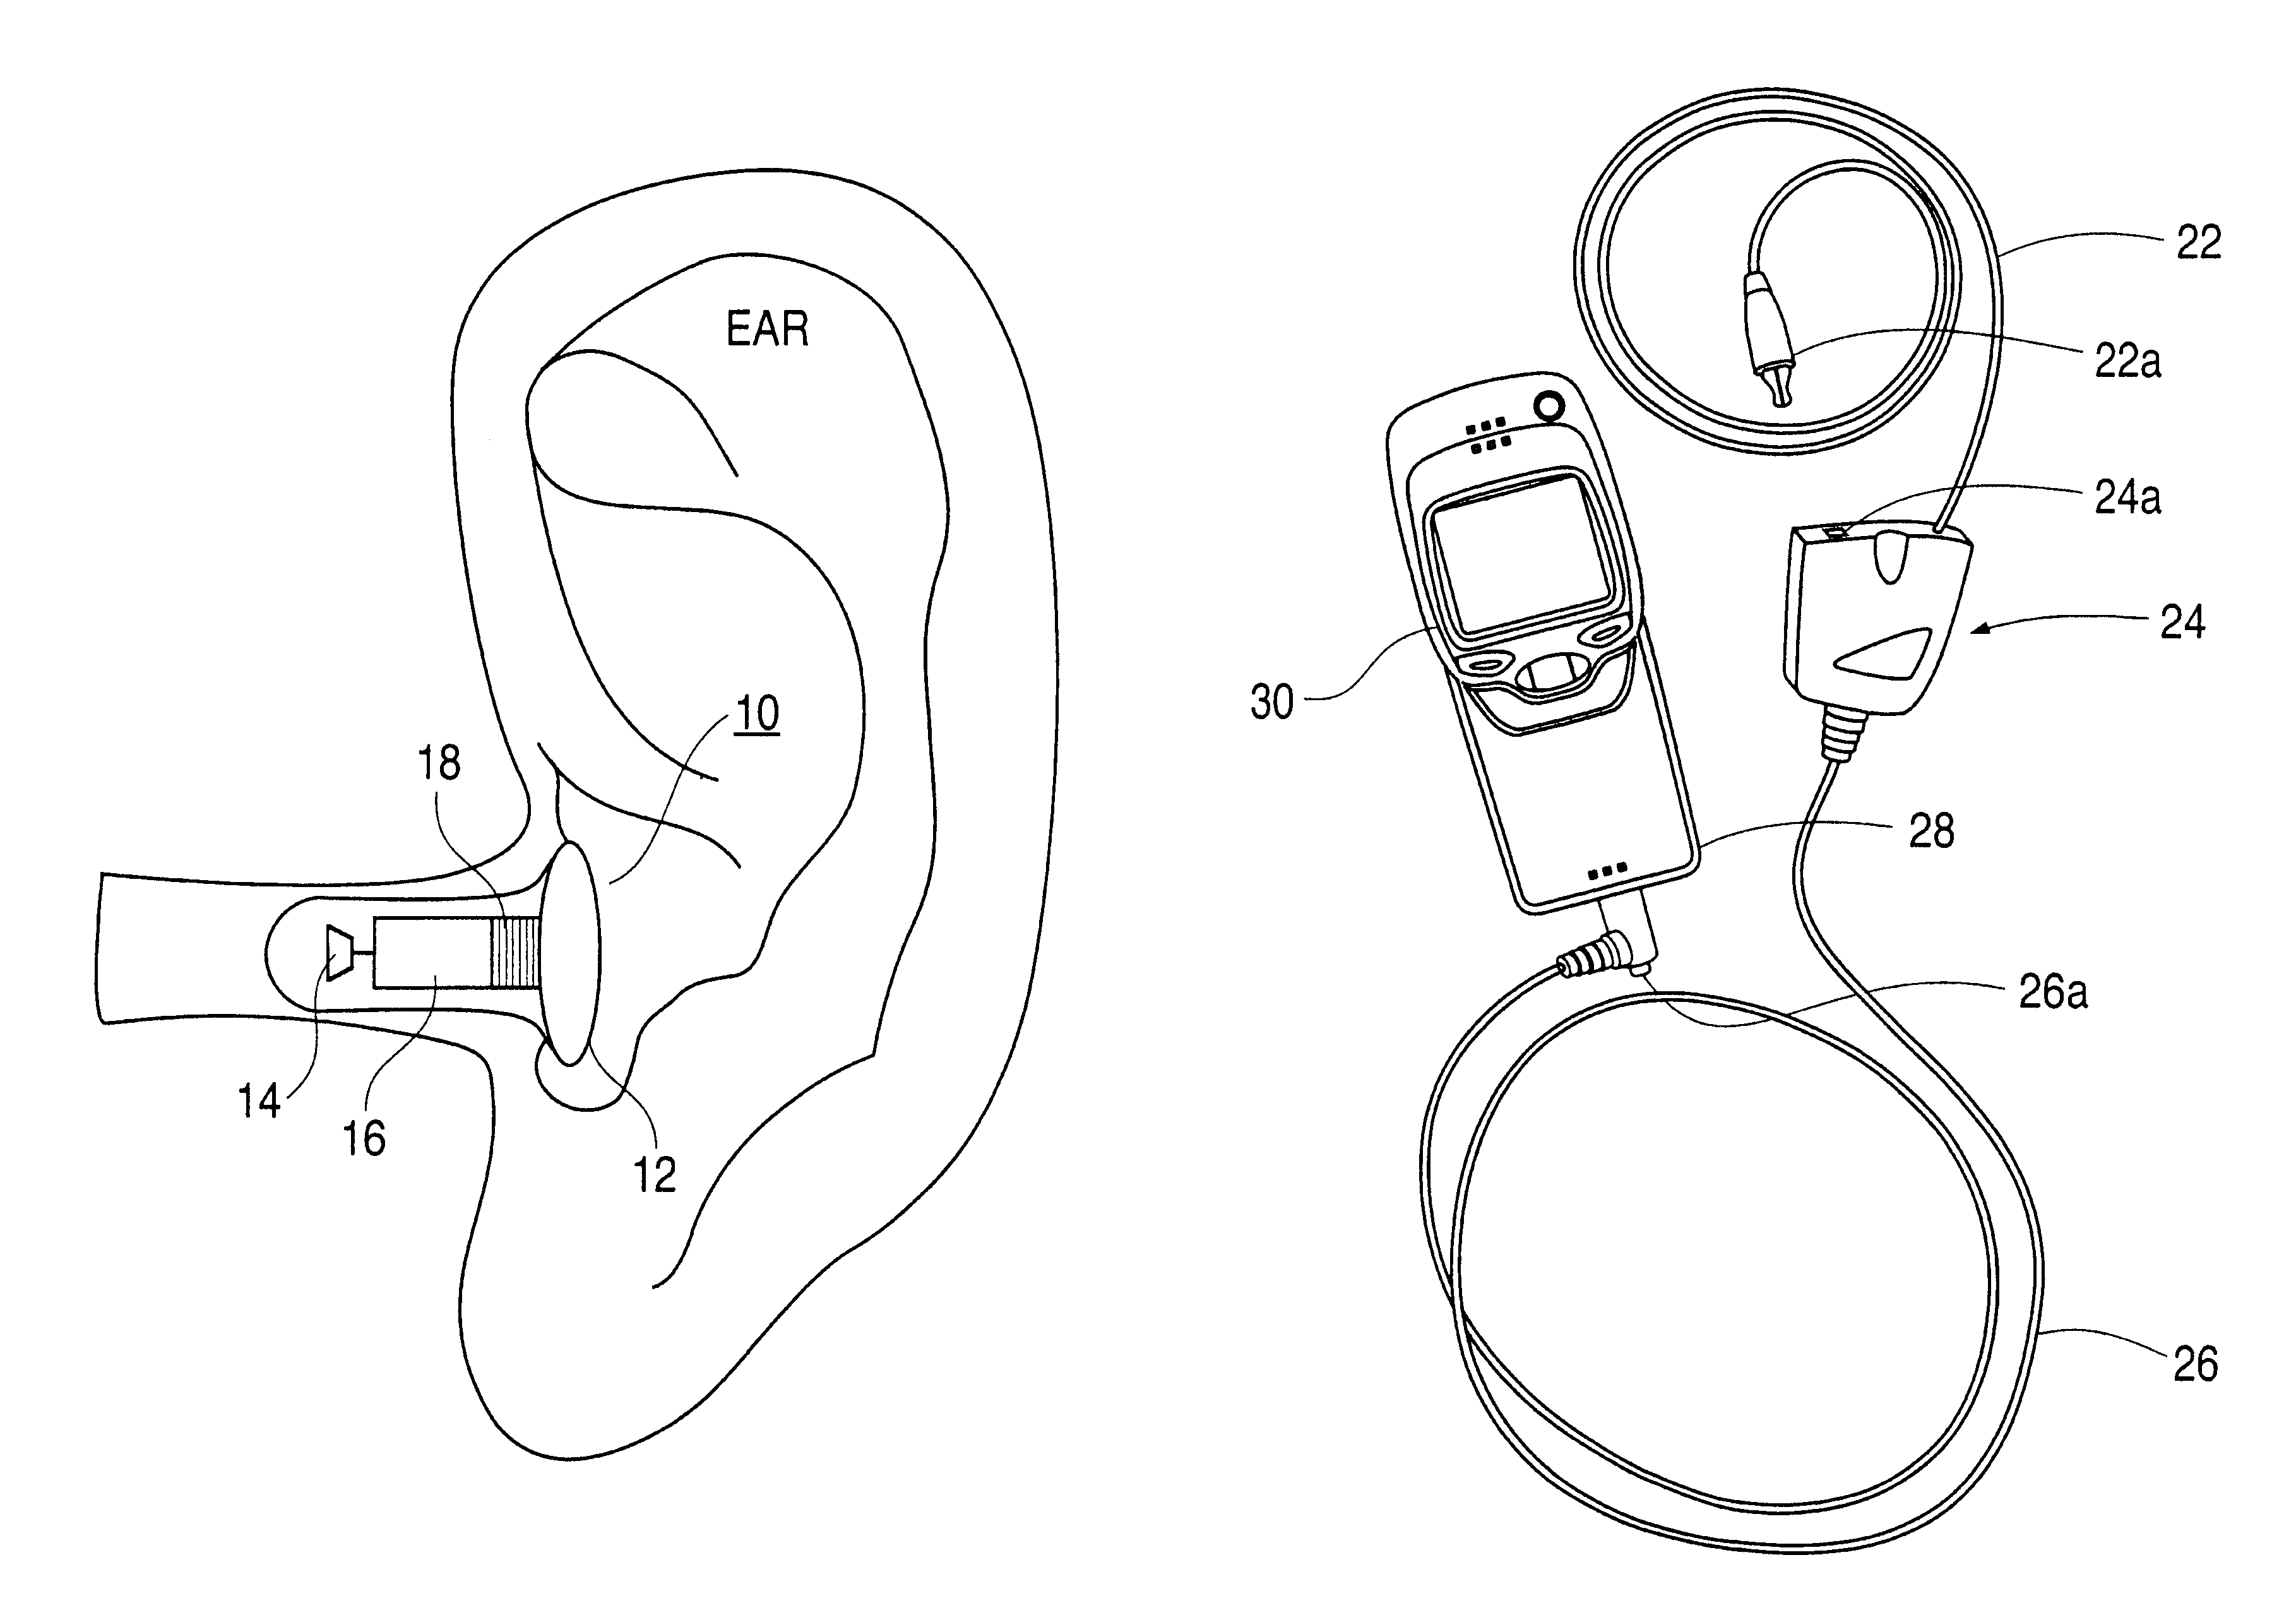 Garment having wireless loopset integrated therein for person with hearing device